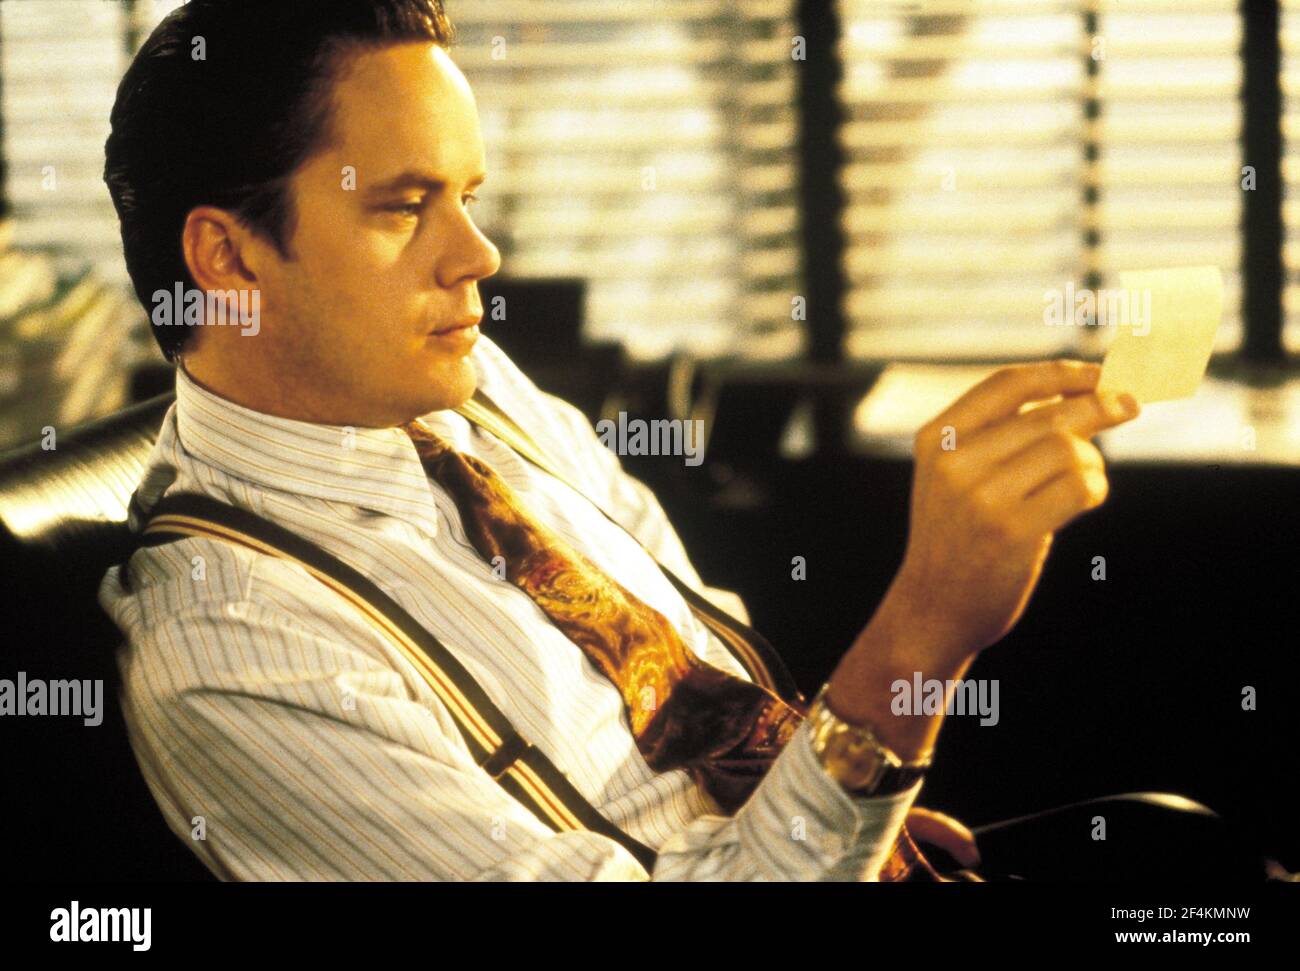 TIM ROBBINS in THE PLAYER (1992), directed by ROBERT ALTMAN. Credit: SPELLING FILMS INTERNATIONAL / Album Stock Photo